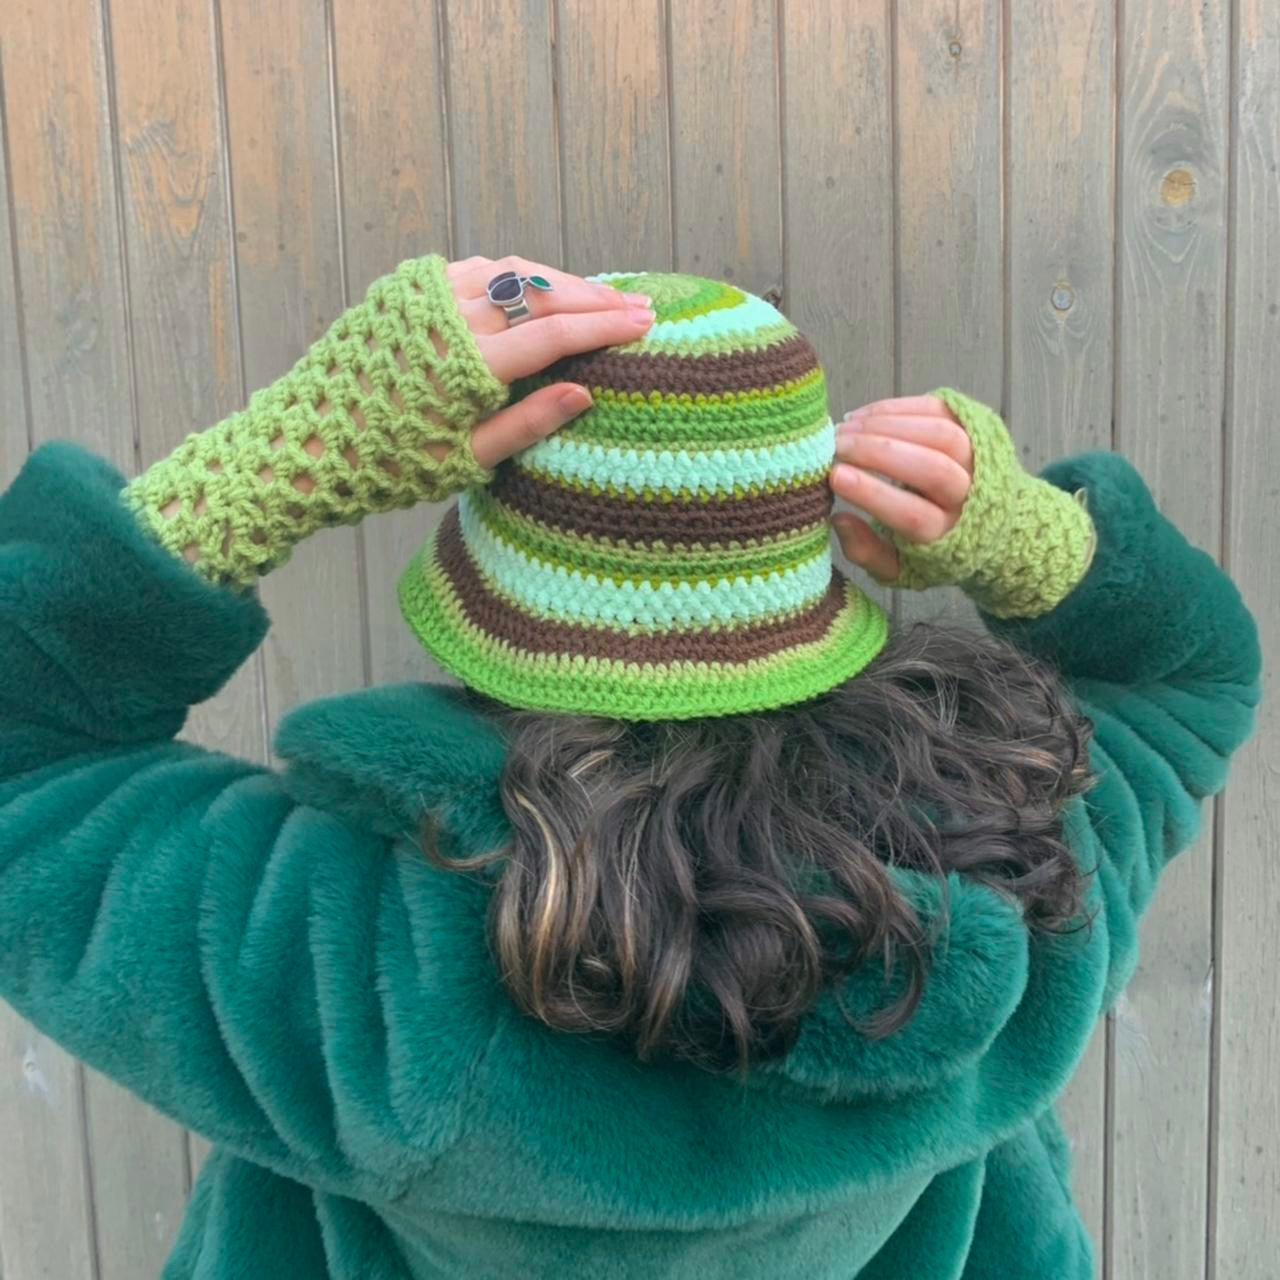 Handmade striped crochet bucket hat in green and brown